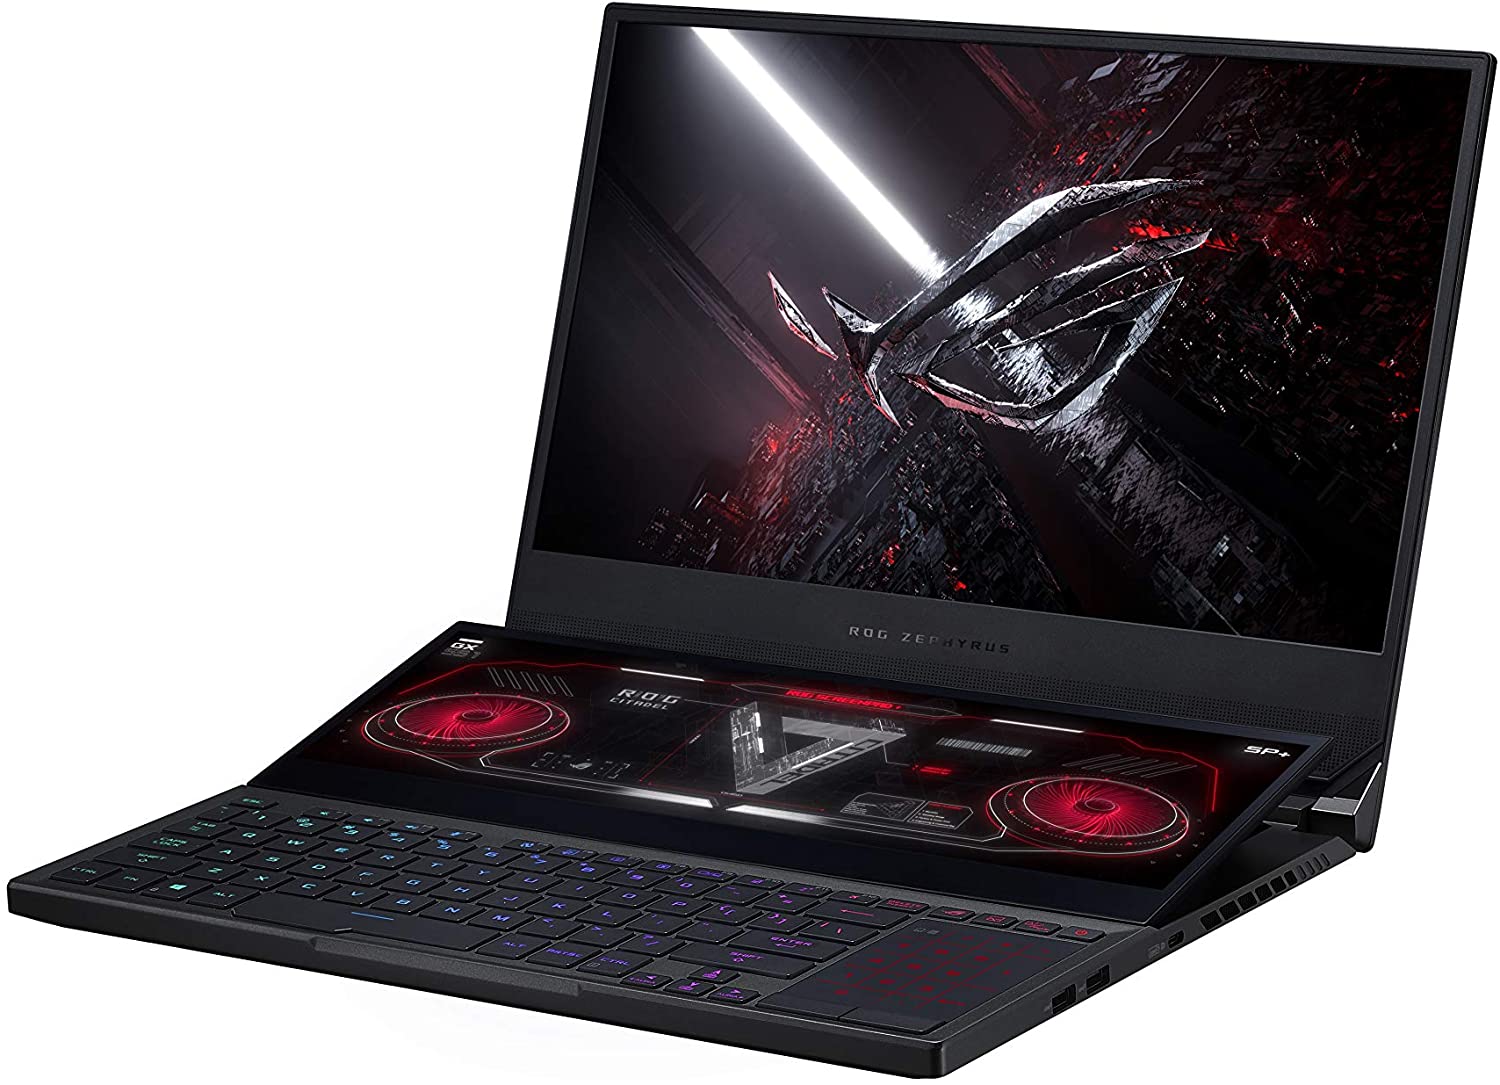 Best Touch Screen Laptop For Gaming 2022 [Ultimate Guide]